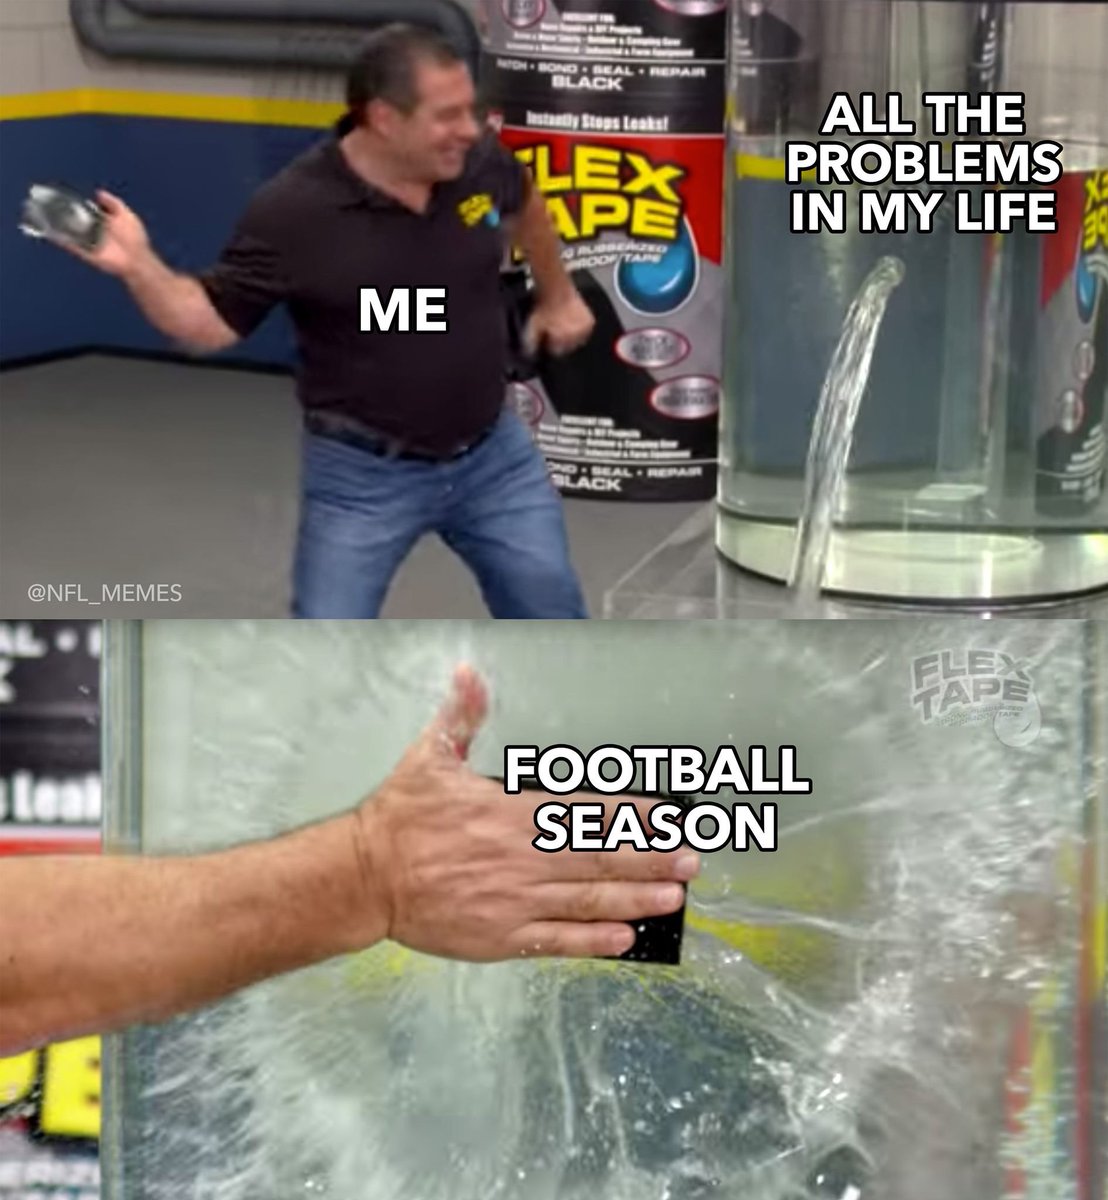 nfl memes - flex tape depression meme - Black stany stops Leats! Le All The Problems In My Life Pe Me Free Football Season